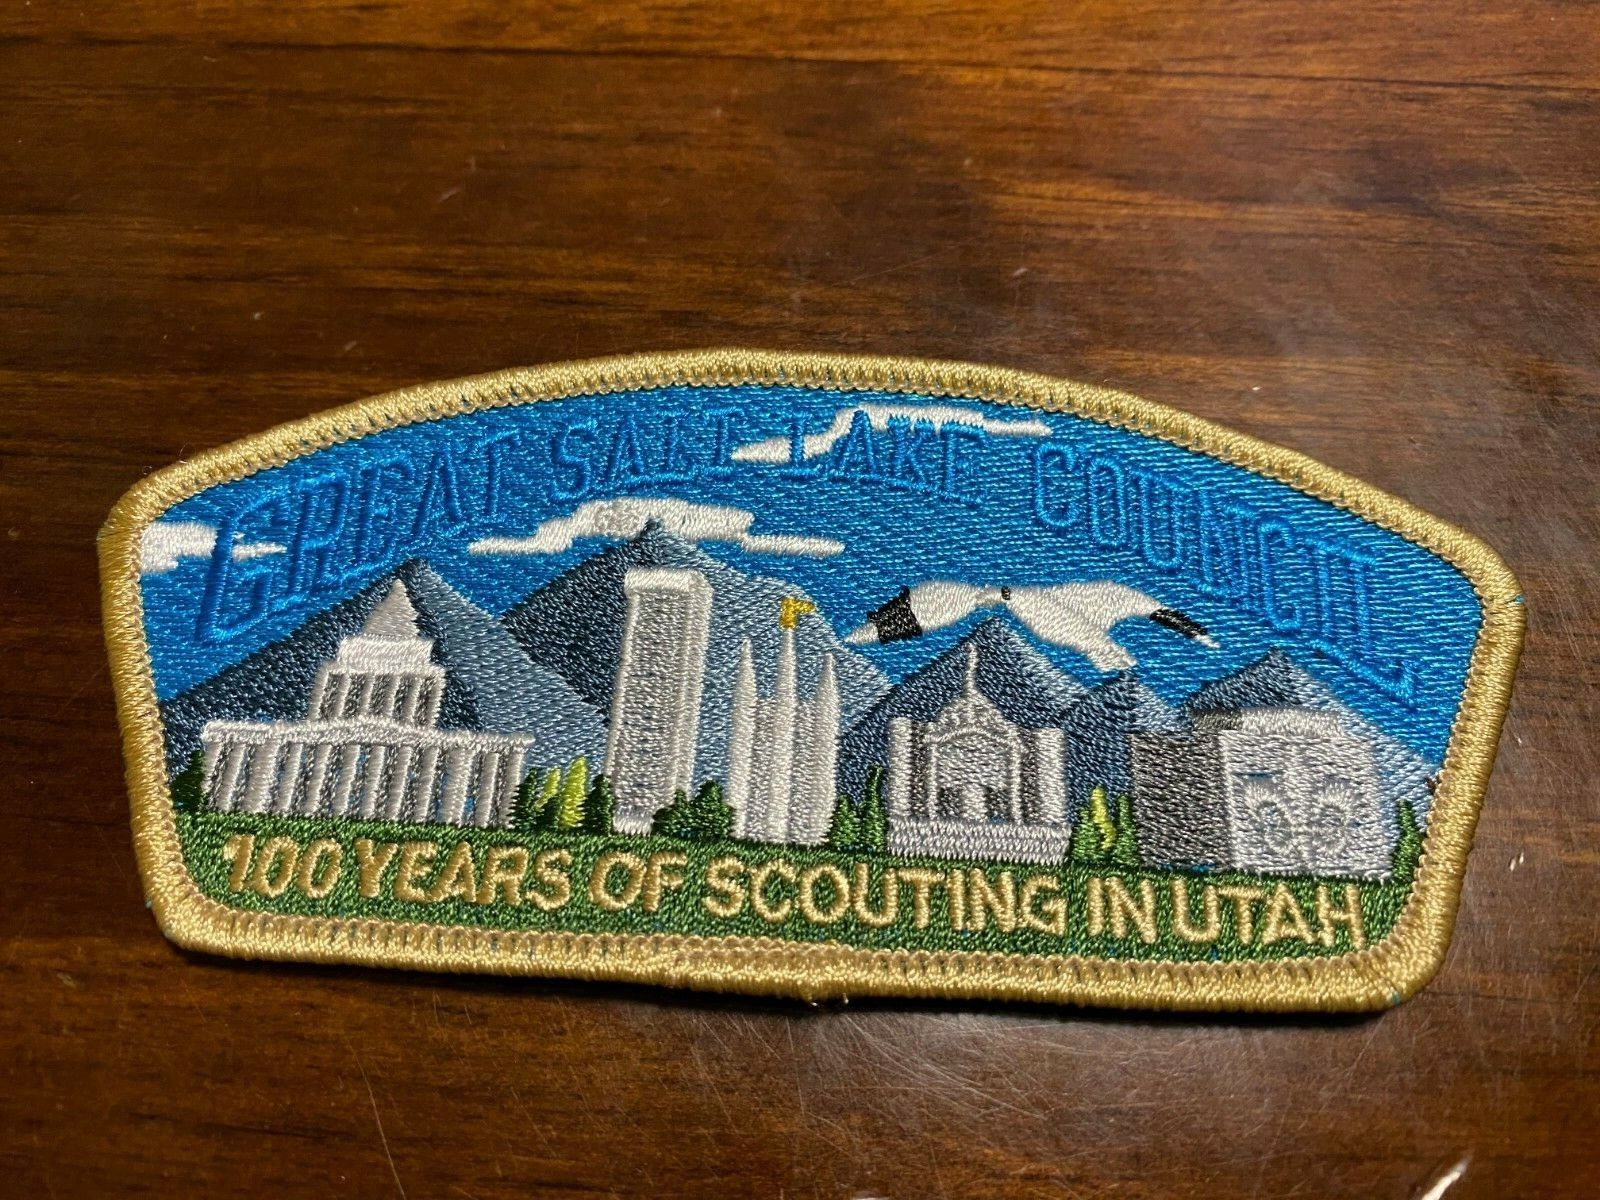 Great Salt Lake Council 100 Years of Scouting CSP